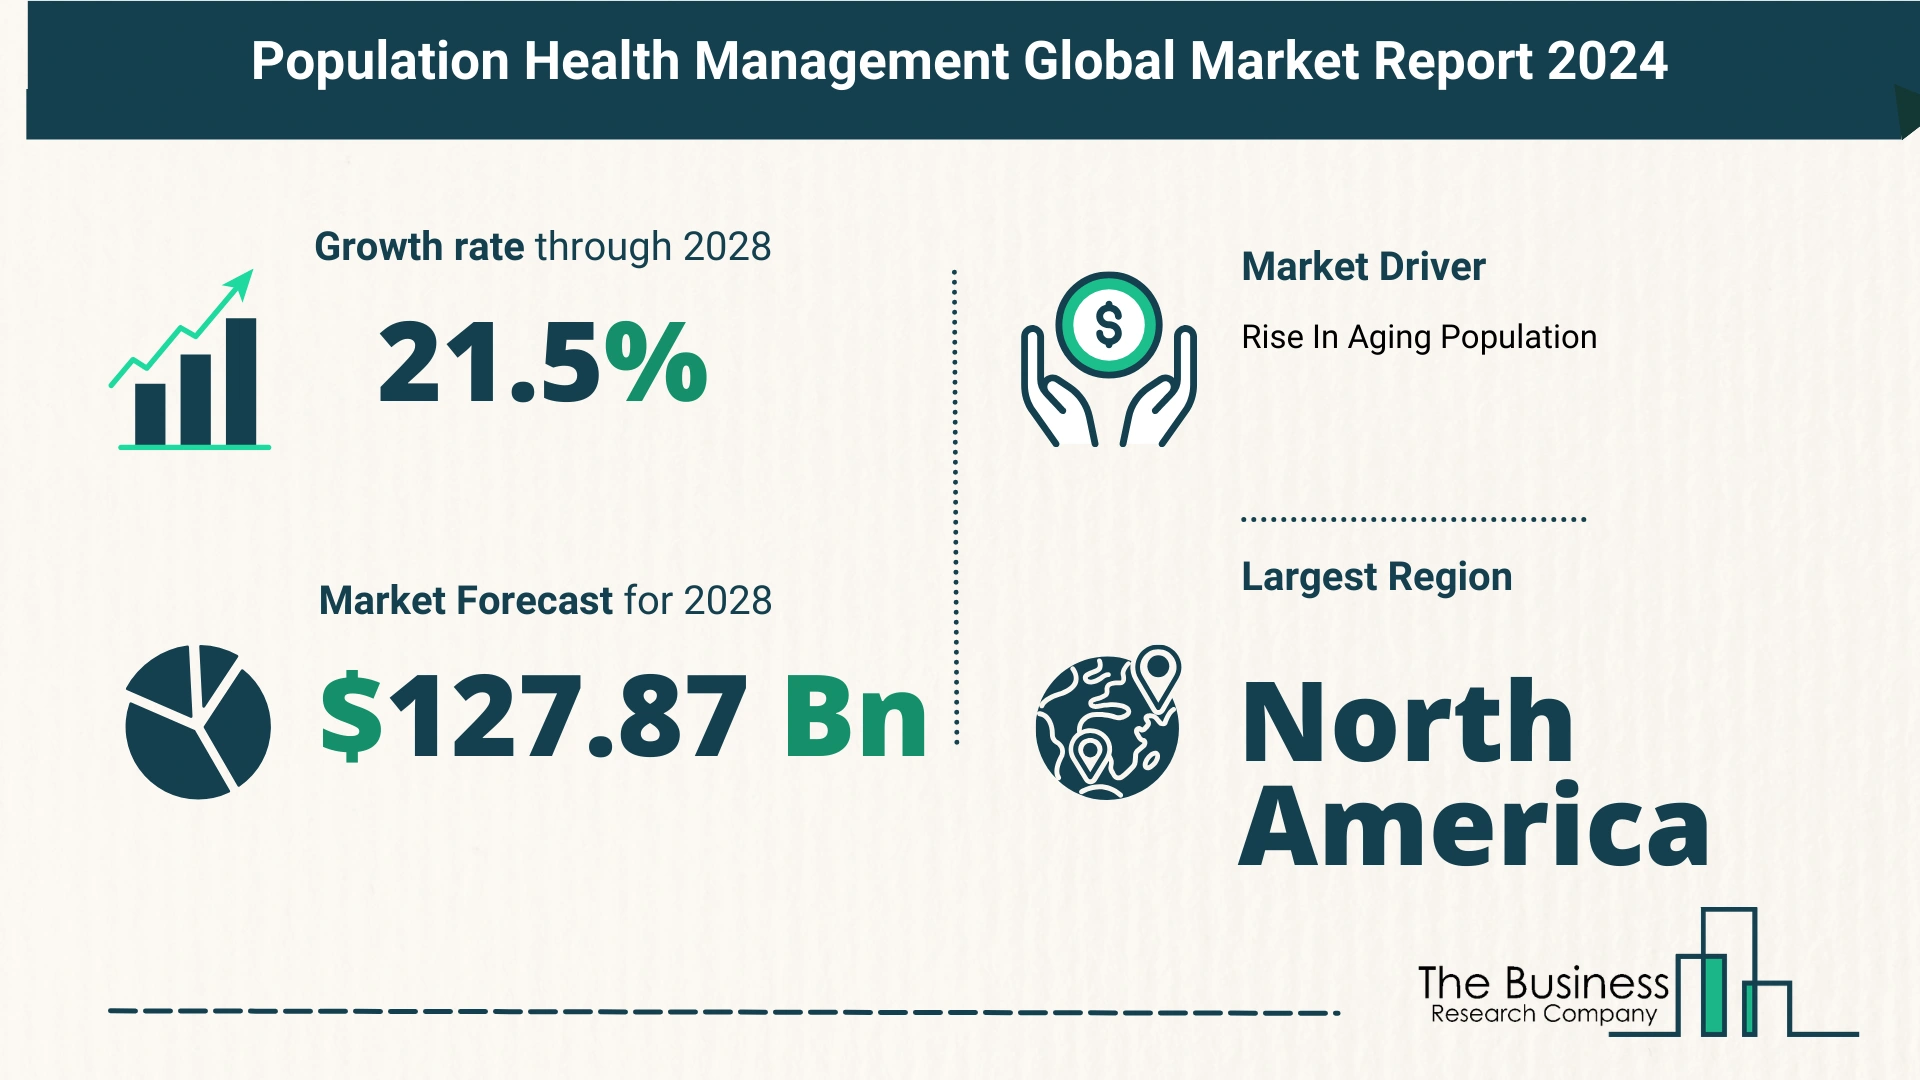 5 Takeaways From The Population Health Management Market Overview 2024